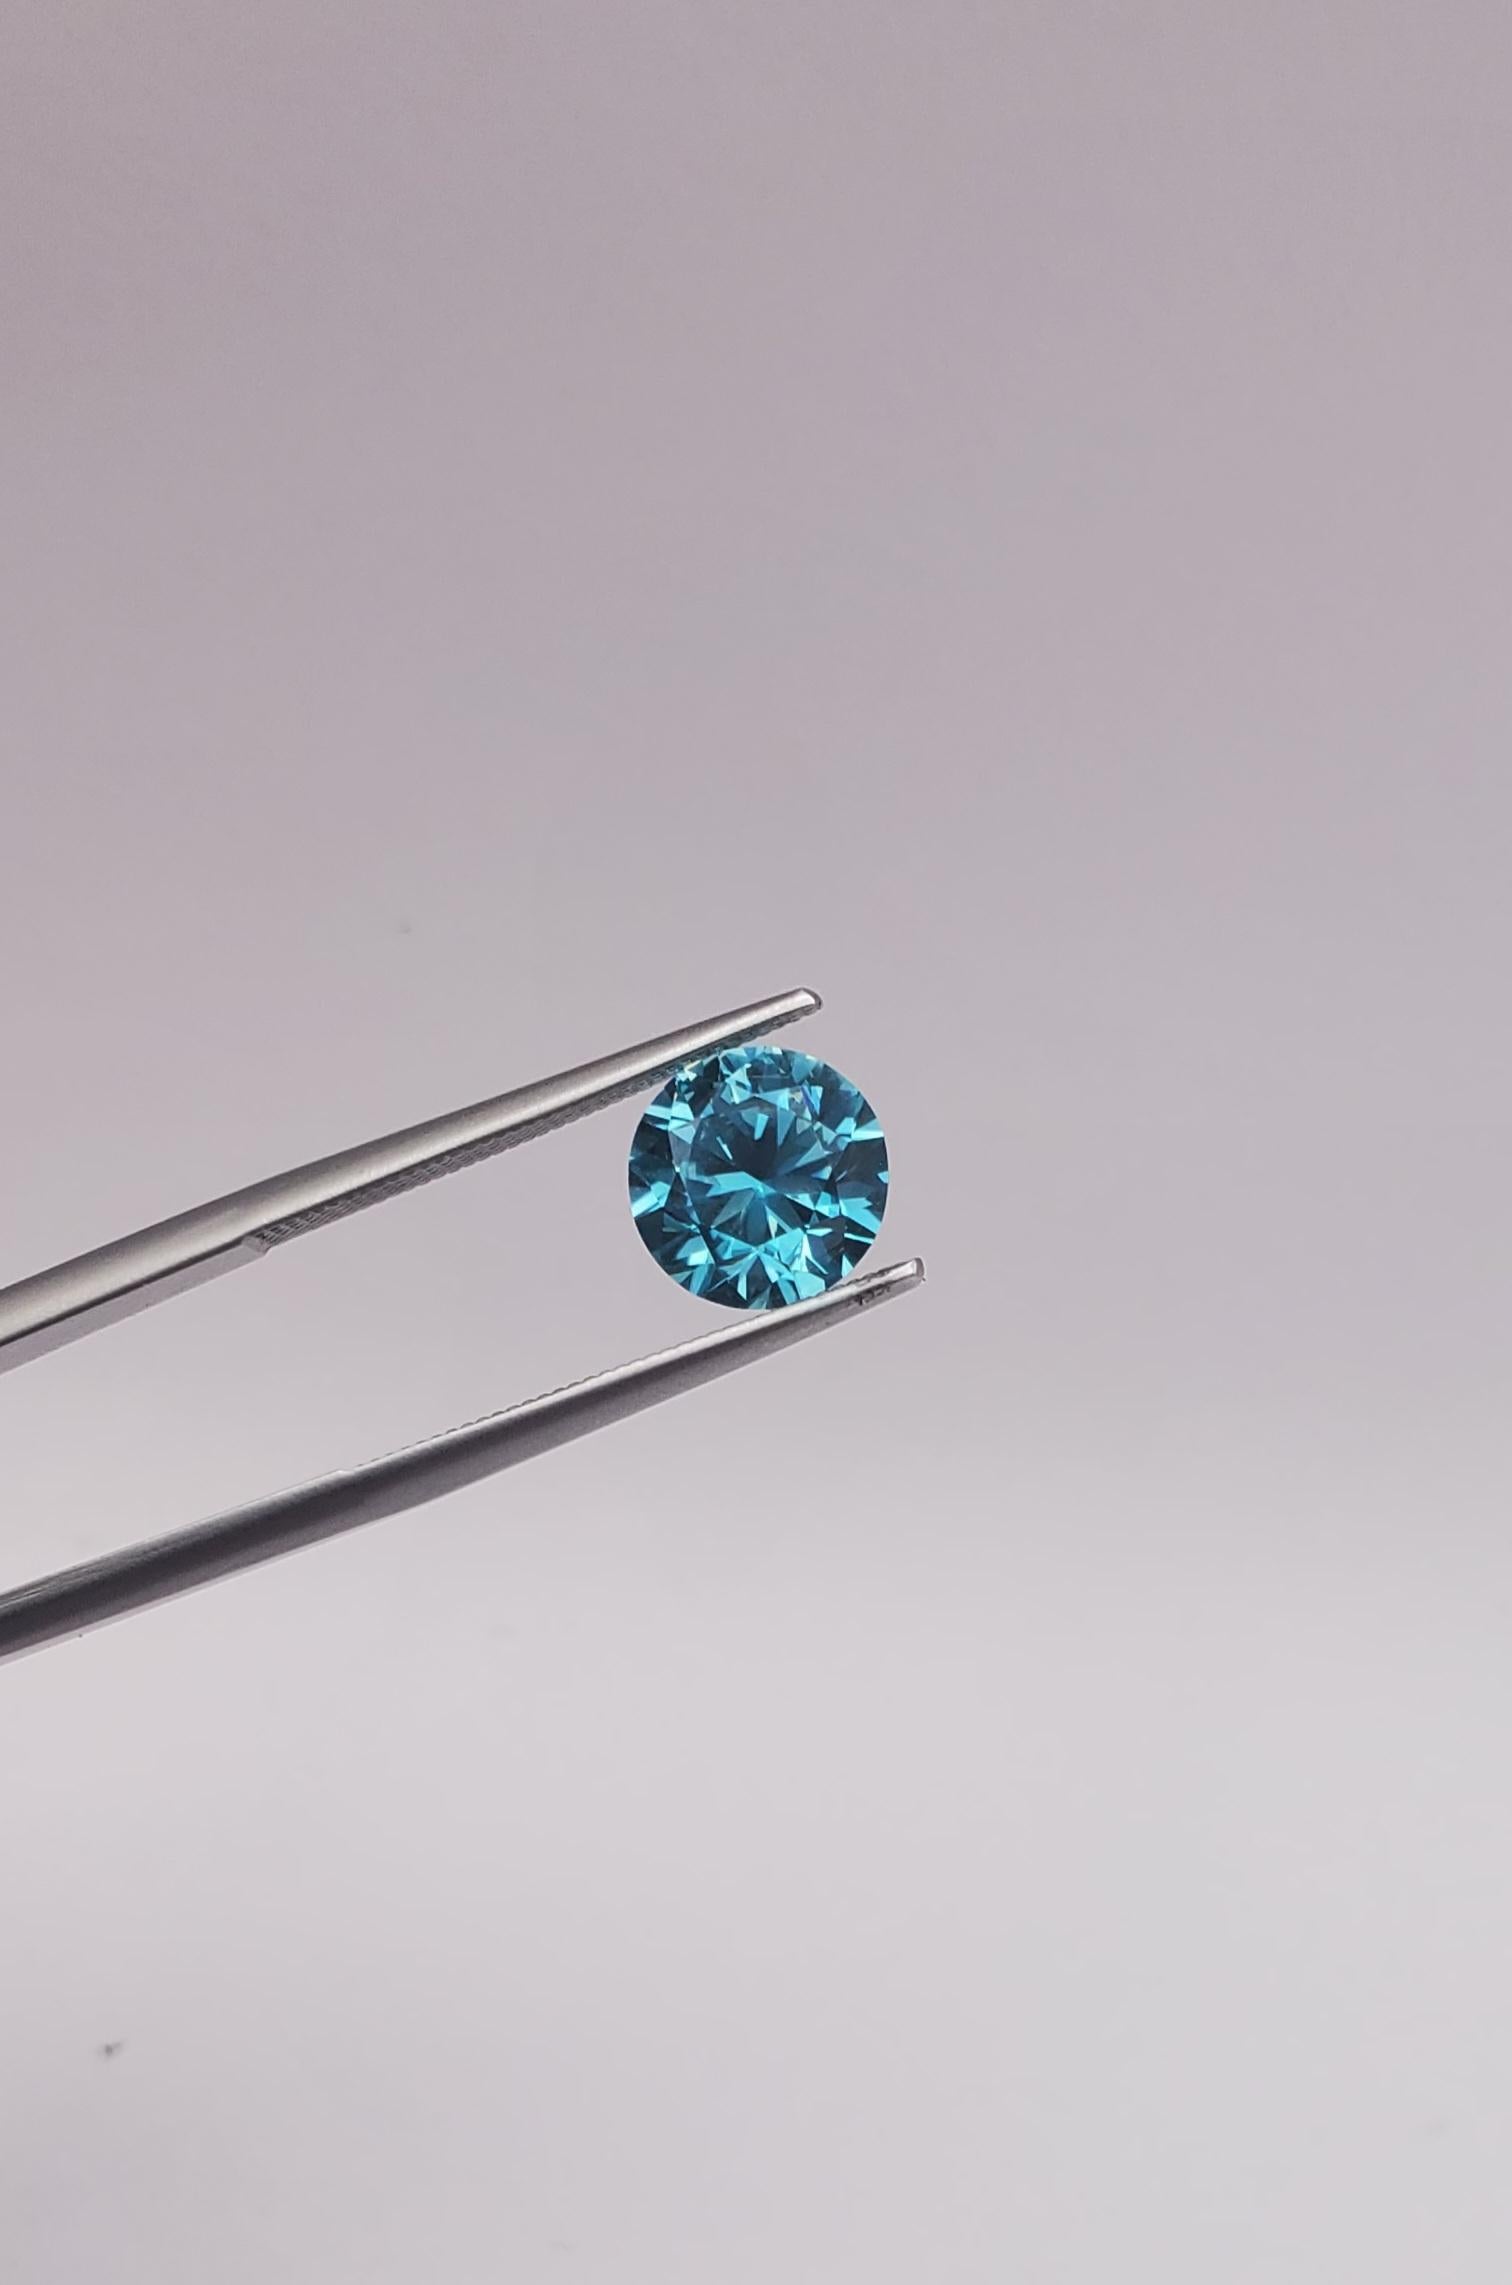 Incredible 2.93ct Round Blue Zircon  For Sale 3